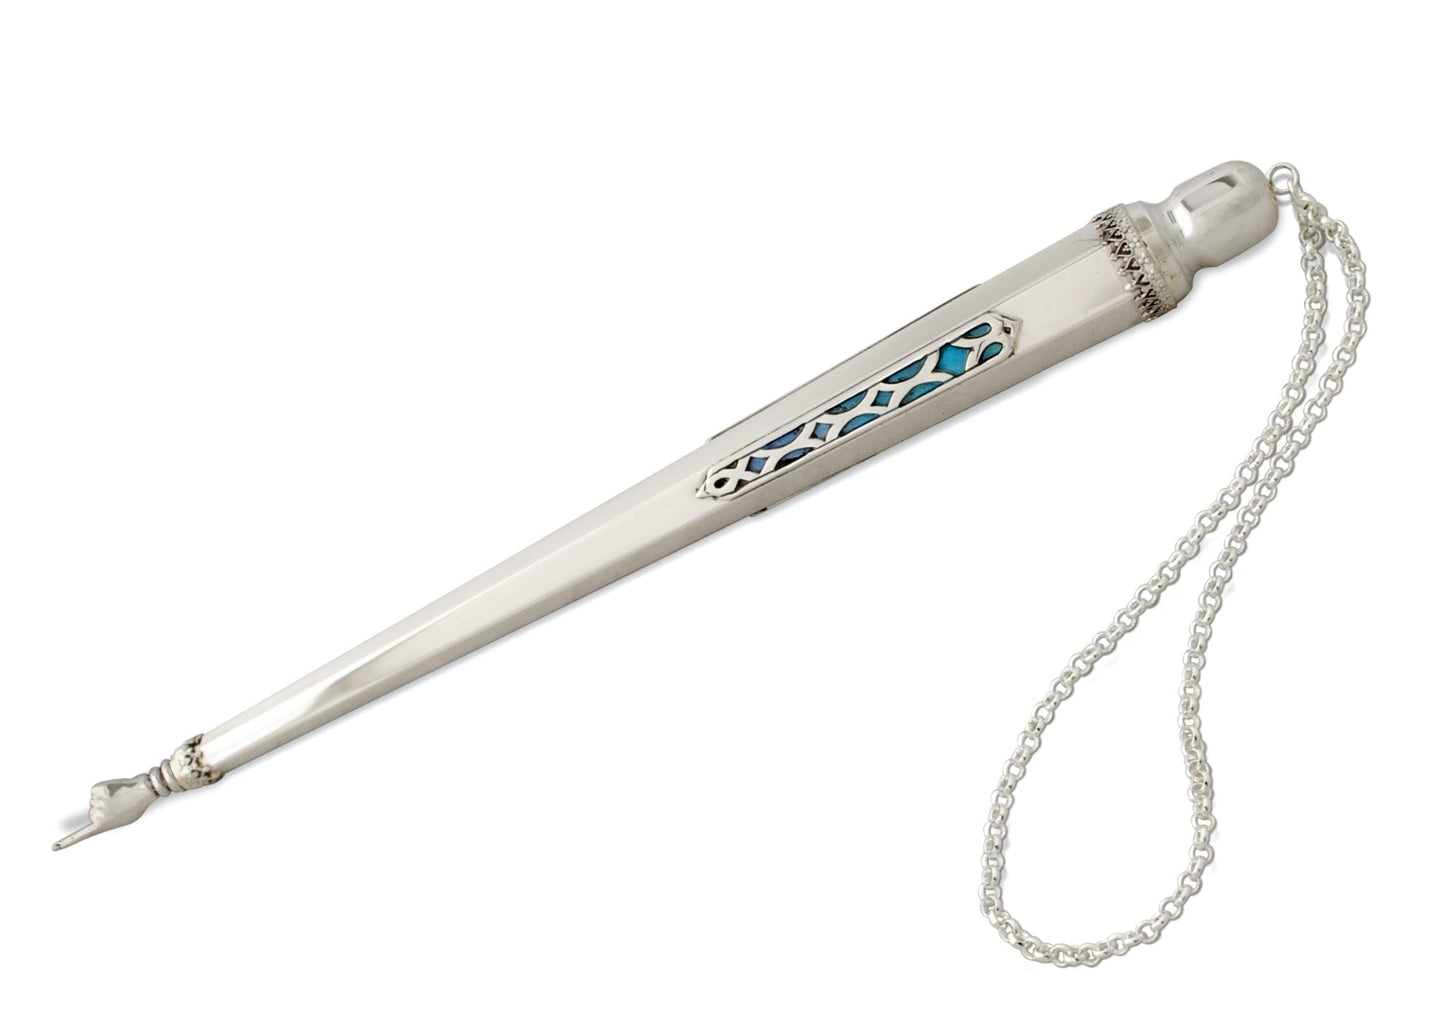 Enamel and Sterling Silver Torah Pointer